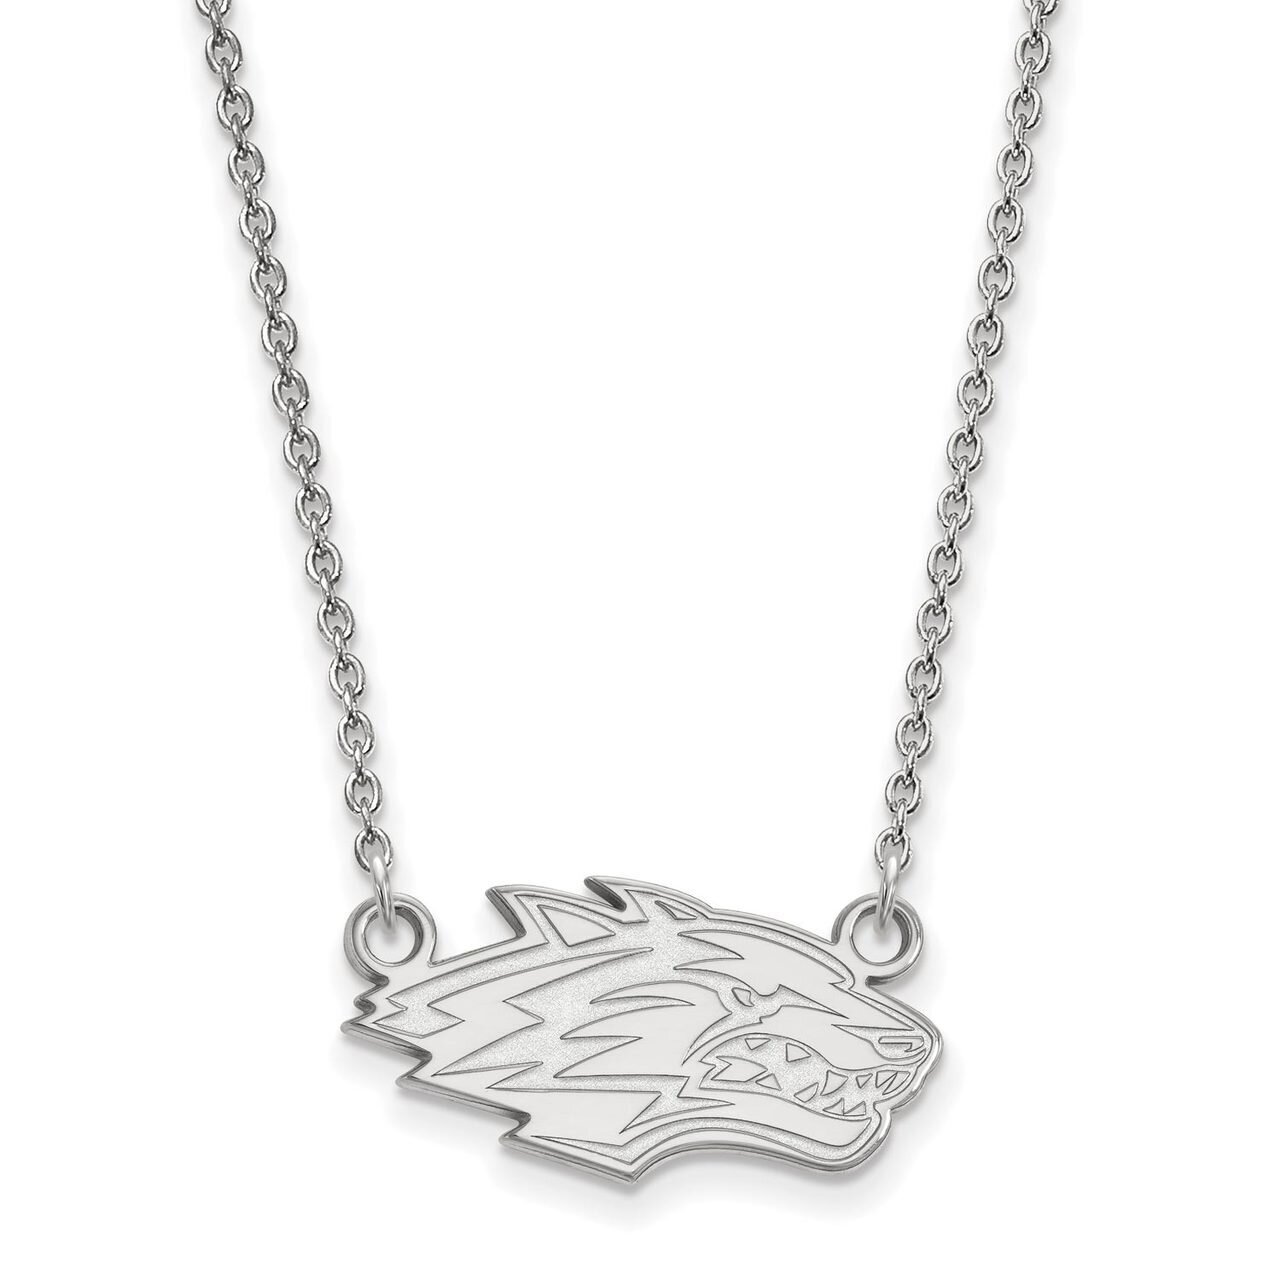 University of New Mexico Small Pendant with Chain Necklace 10k White Gold 1W008UNM-18